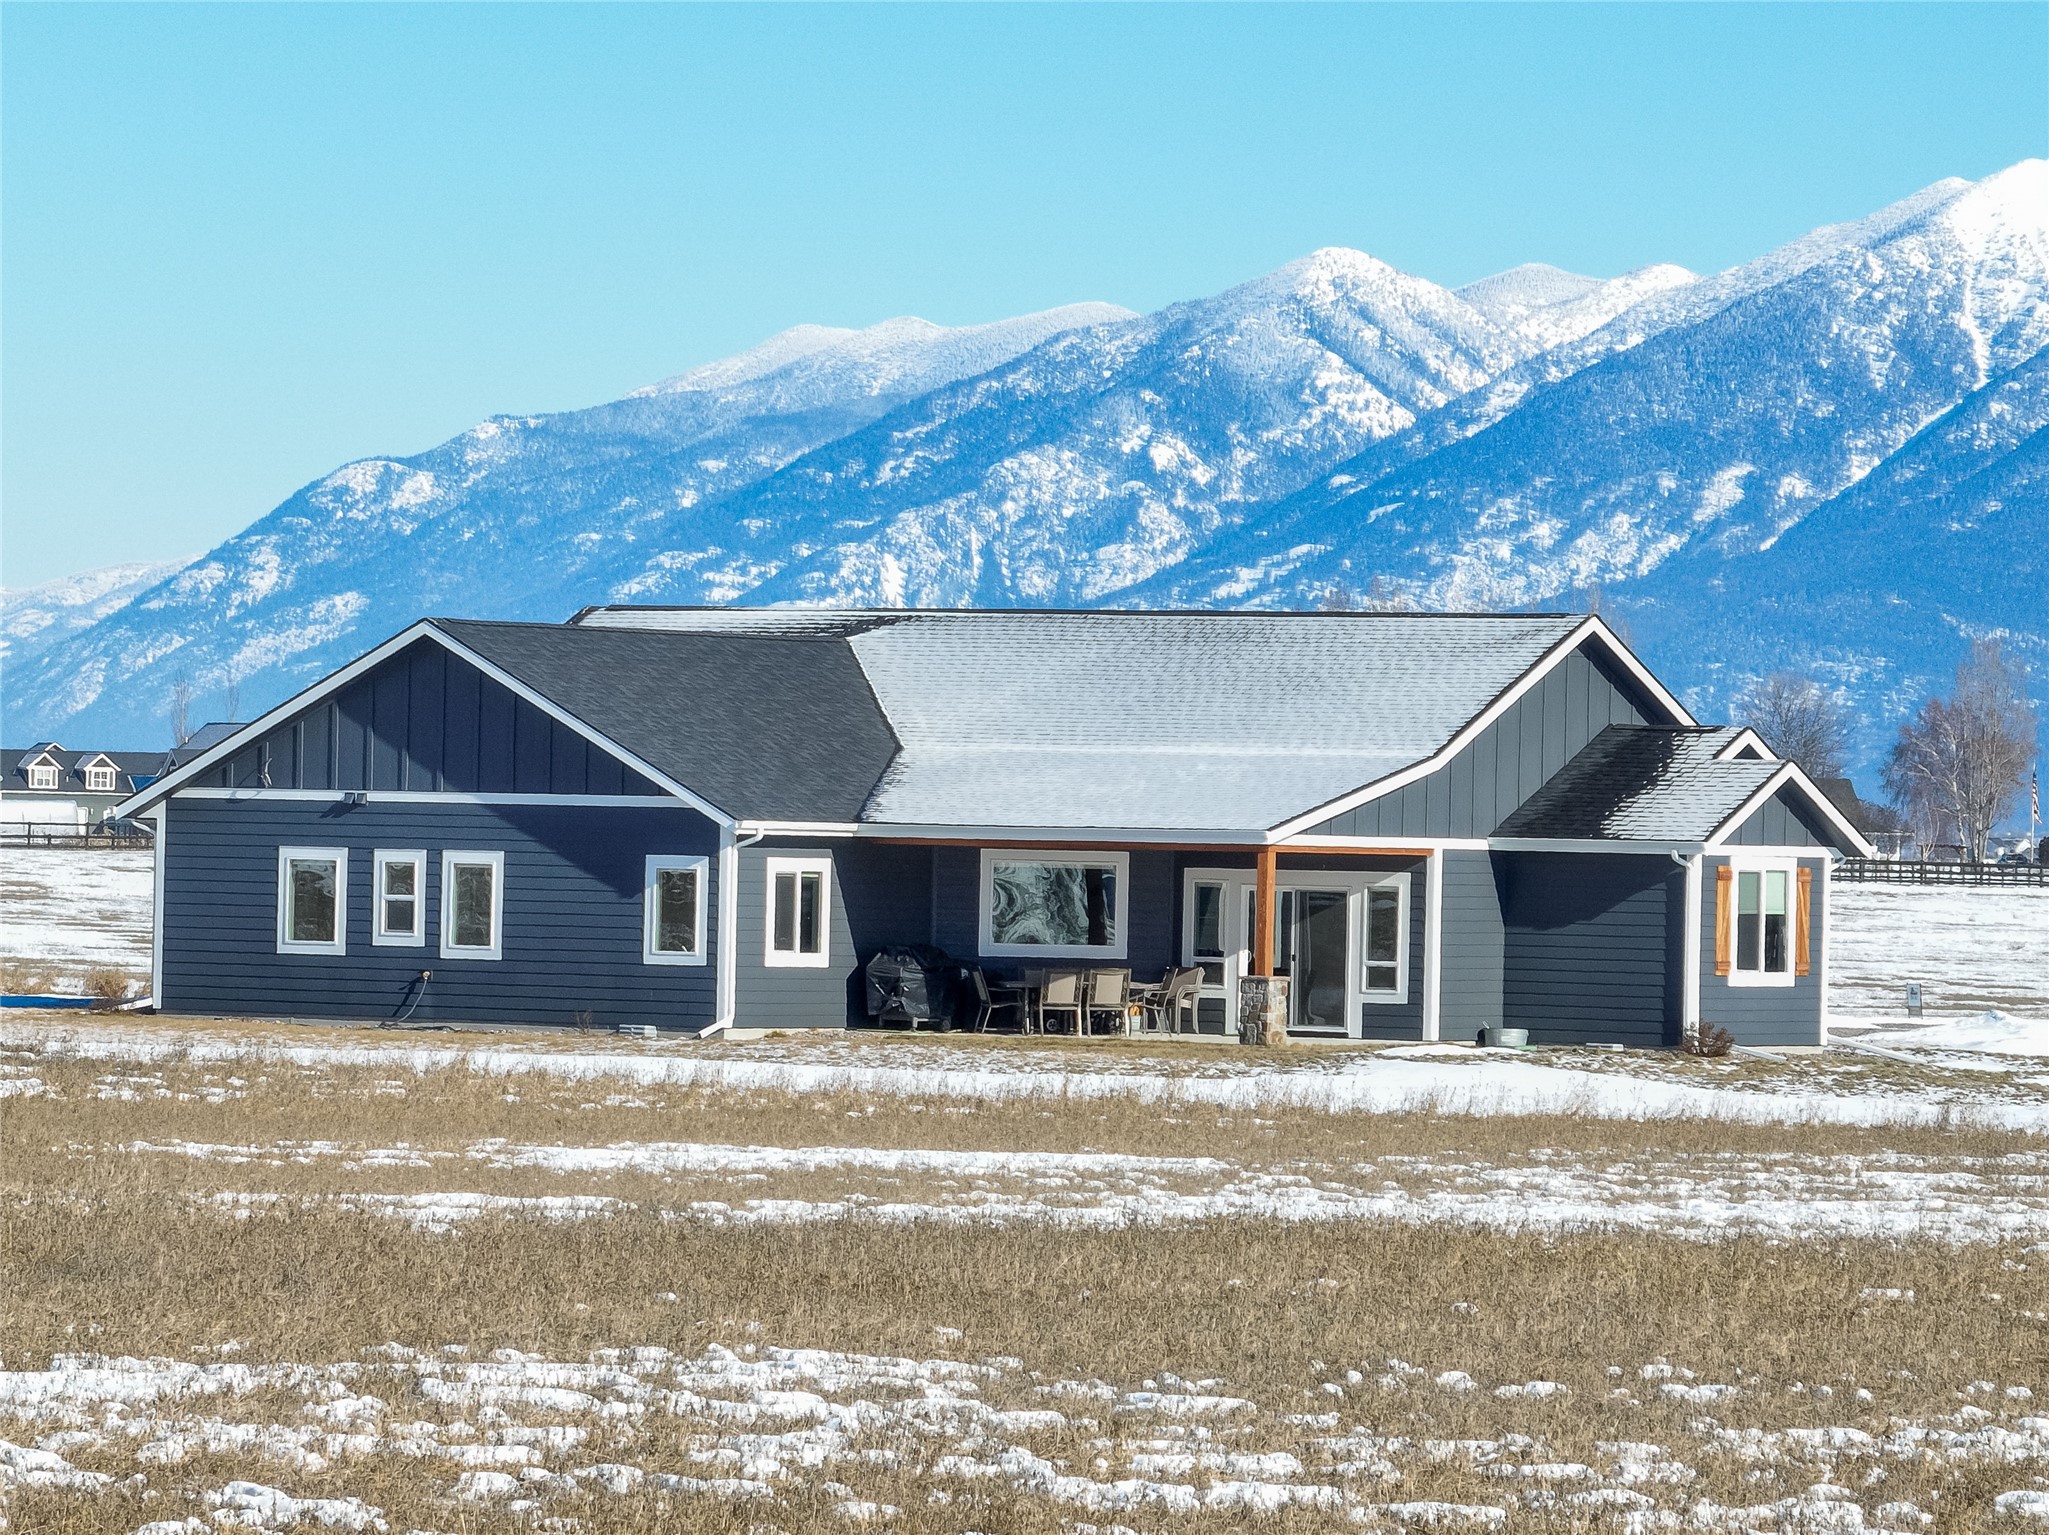 MONTANA COUNTRY LIVING AT IT'S FINEST!  This single-level, charming home is peacefully tucked away on 5 acres of horse property in the Lower Valley countryside.  360 degree unobstructed mountain views surround this beautiful homestead while only being minutes from Bigfork, Lakeside, and Kalispell.  The interior of the home boasts custom alder cabinetry, circle-sawn fir flooring, vaulted ceilings, granite countertops, walk-in tiled shower, oversized soaking tub, custom rock fireplace, coffee bar, and so much more!  Enjoy the evening sunsets expanding over the Big Sky under the covered patio as the wildlife graze the property.  THIS IS A MUST-SEE!  Call April Moser at 406-885-2313 or your Real Estate Professional for more details.